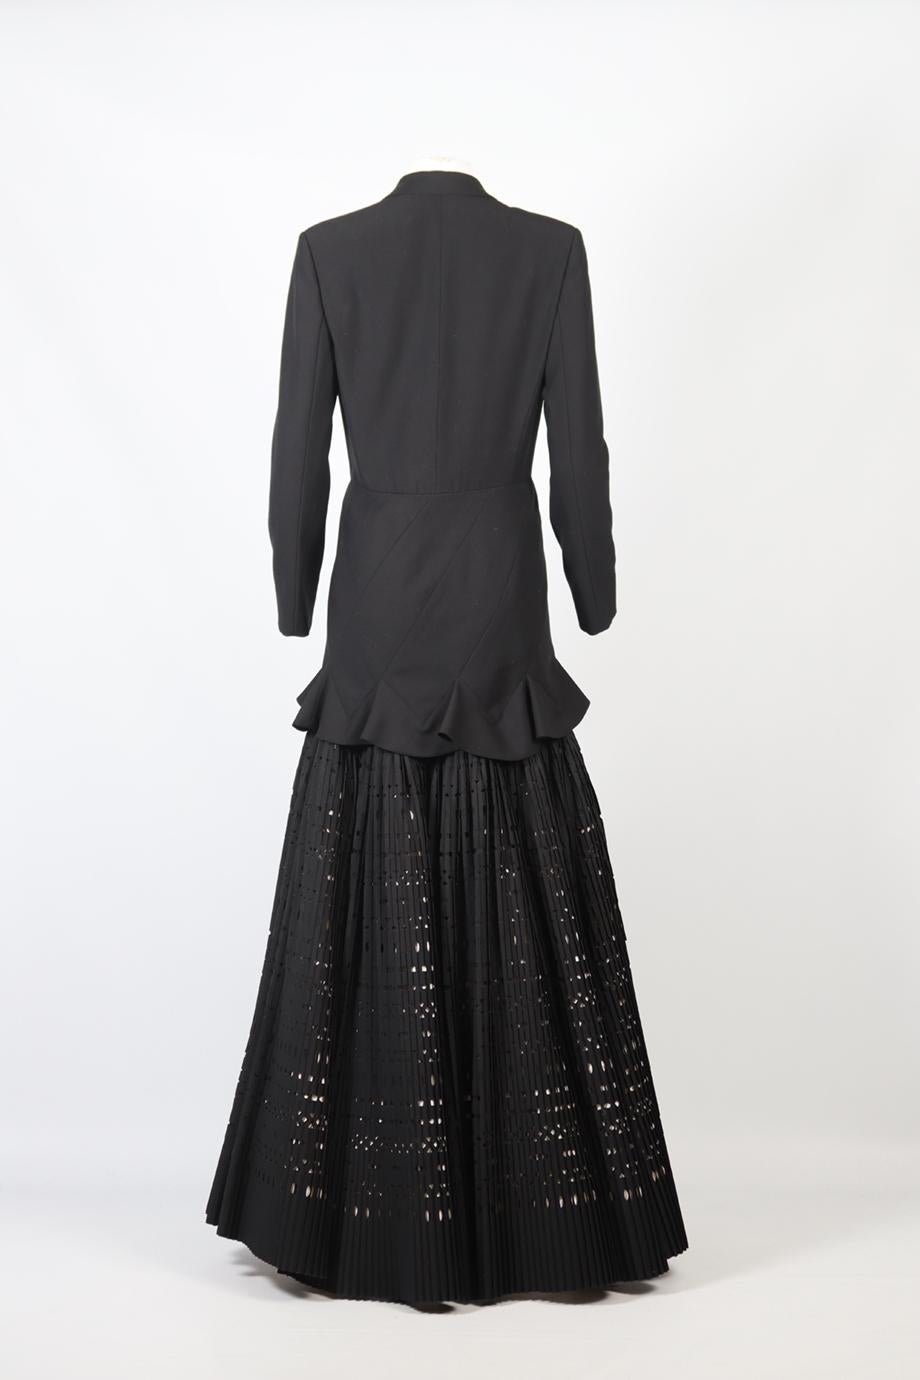 Azzedine Alaïa Haute Couture Wool Blend Gown Large In Excellent Condition For Sale In London, GB